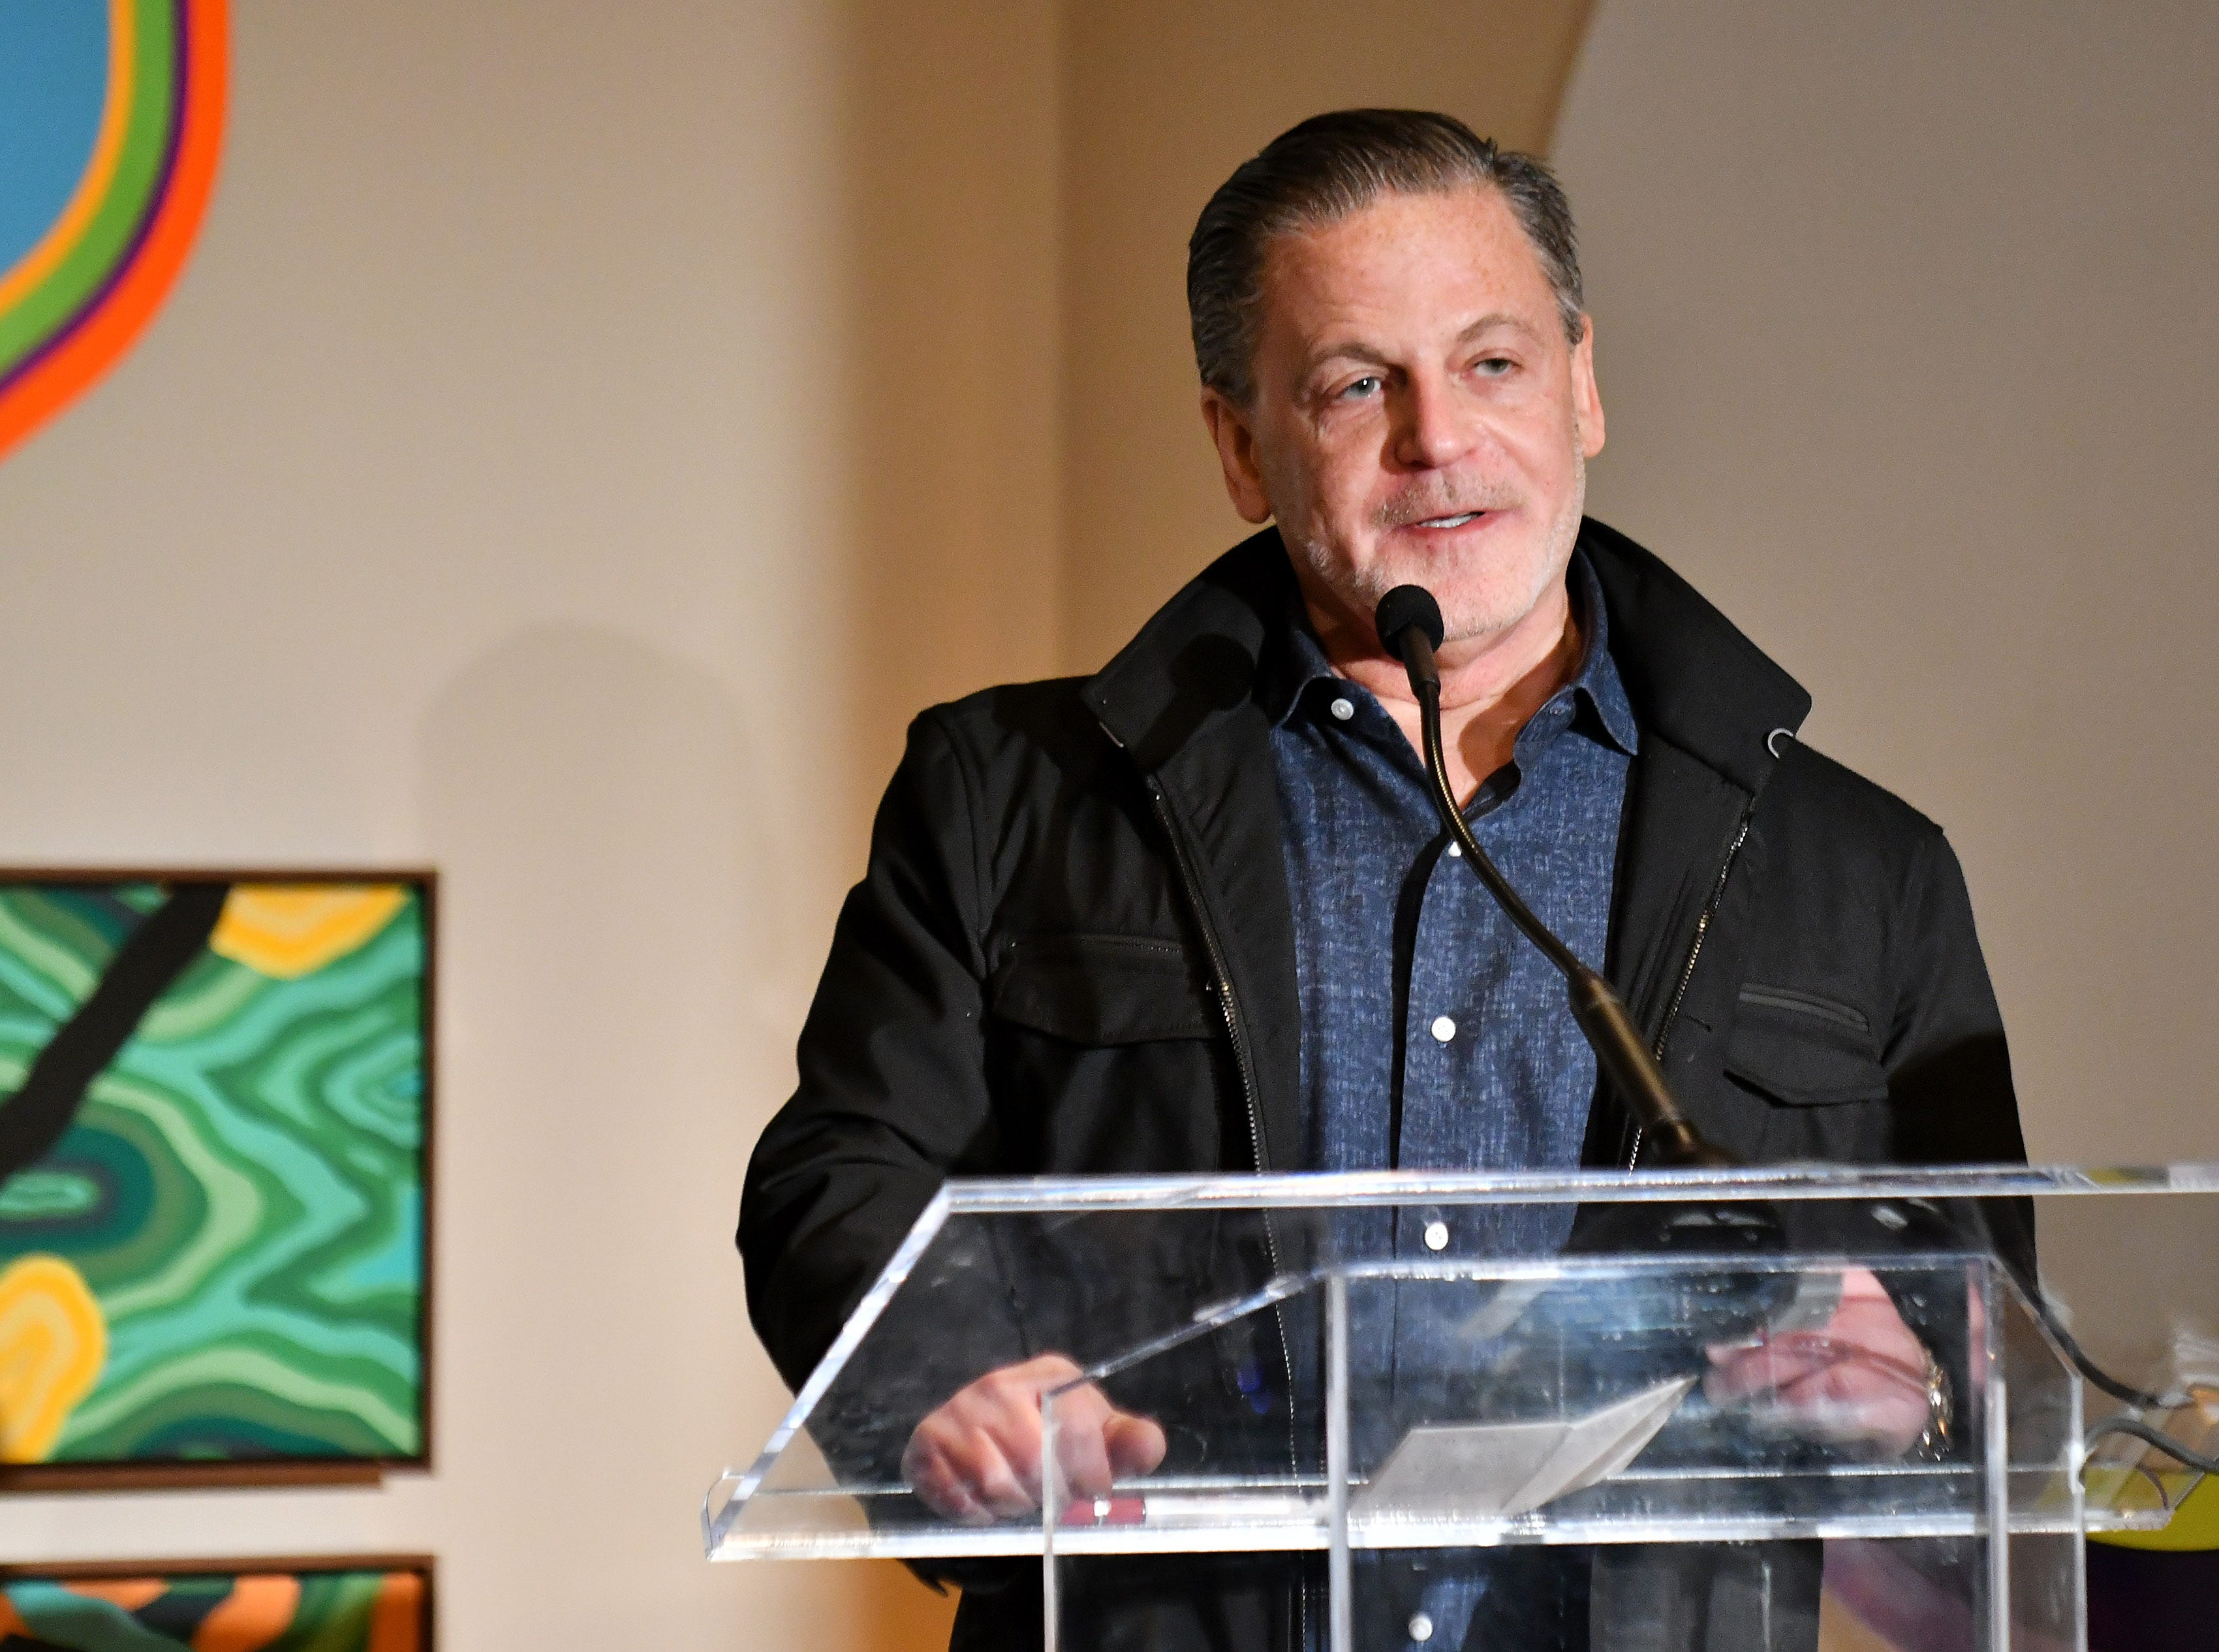 Dan Gilbert, founder of Quicken Loans and Rock Ventures speaks at the press conference.